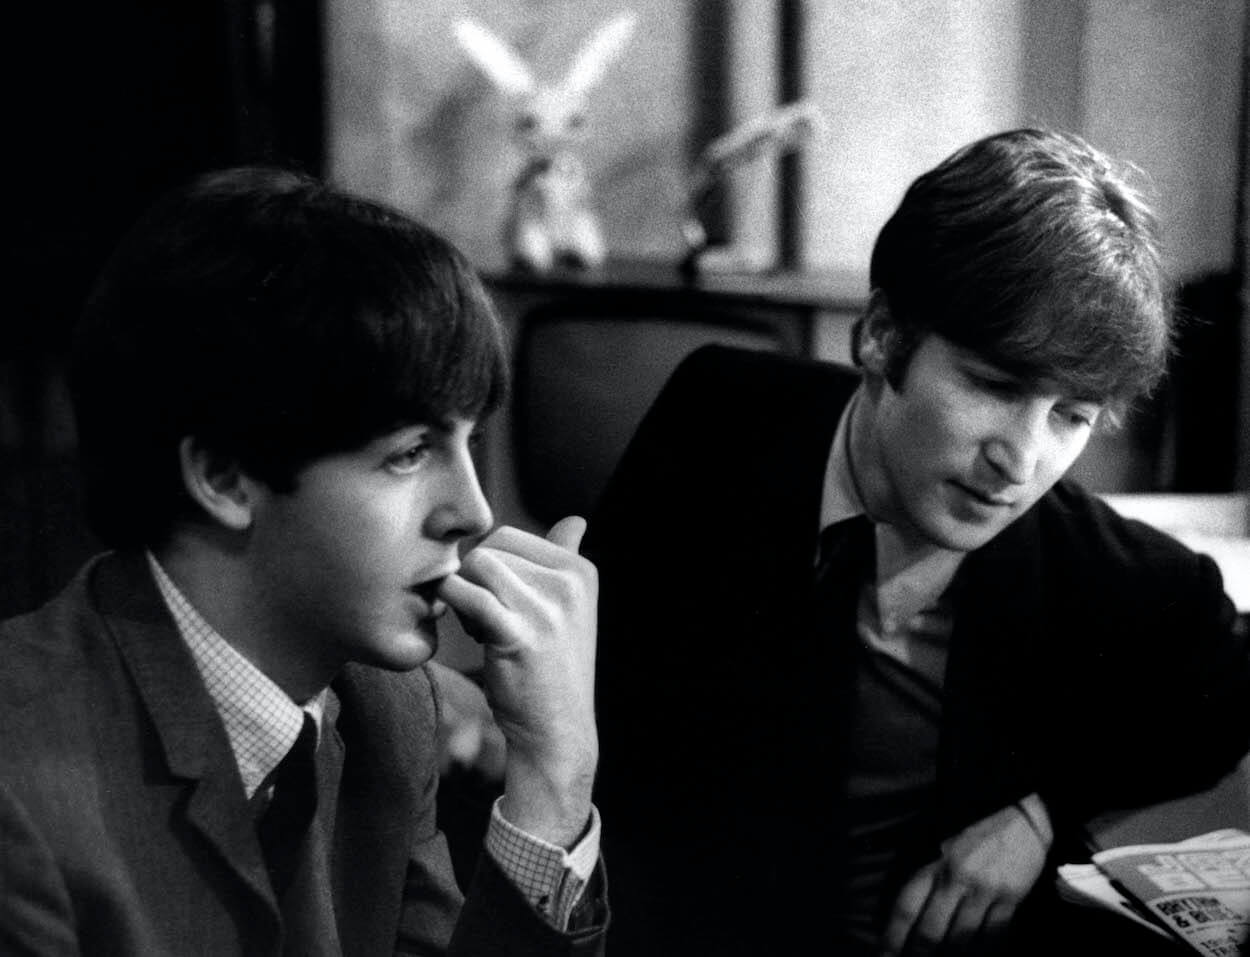 Paul McCartney and John Lennon sit together in late 1963.